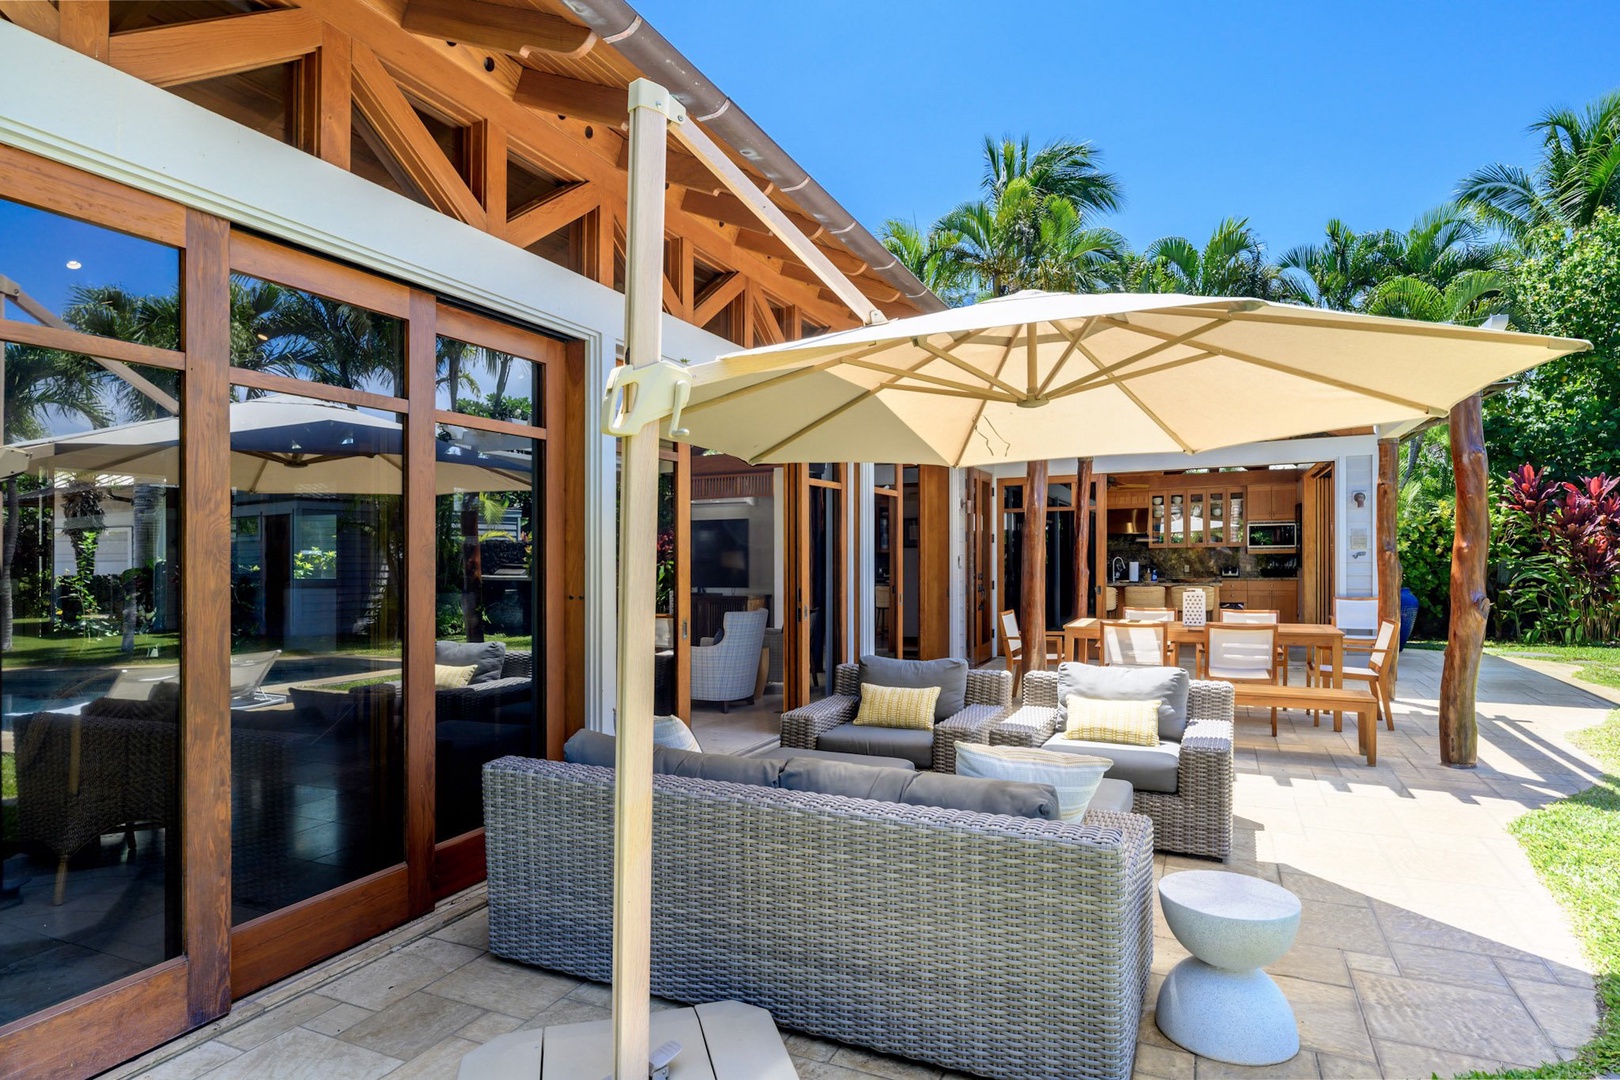 Kamuela Vacation Rentals, 3BD Na Hale 3 at Pauoa Beach Club at Mauna Lani Resort - Enjoy the outdoor lanai seating, a perfect spot to gather, dine, and relax.